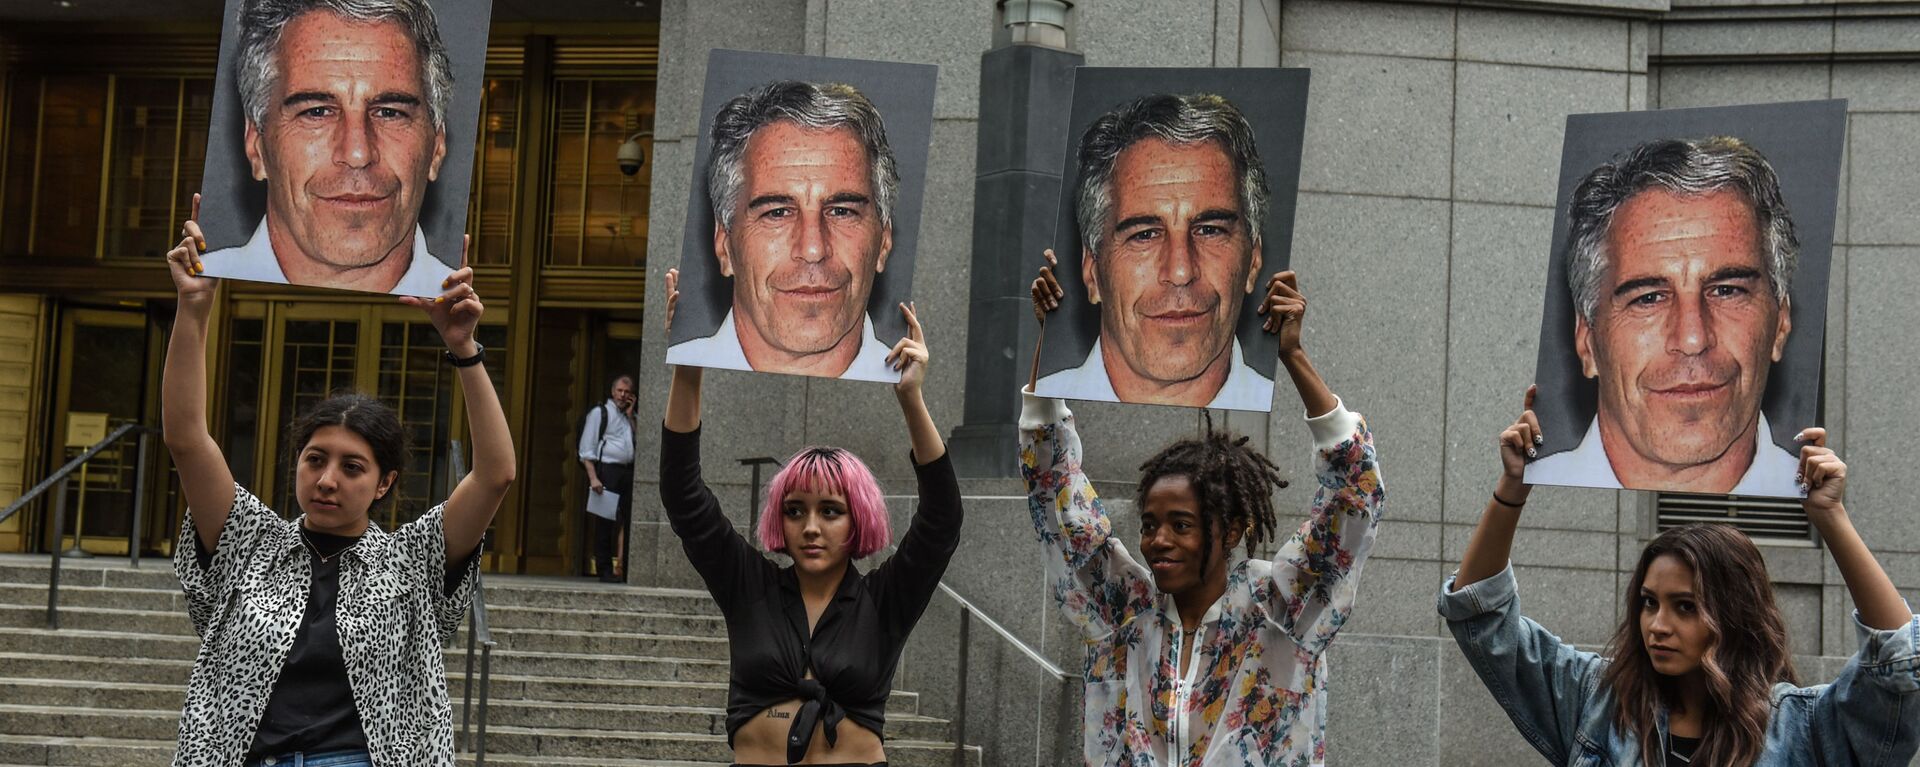 In this file photo taken on July 8, 2019, a protest group called Hot Mess hold up photos of Jeffrey Epstein in front of the Federal courthouse on July 8, 2019 in New York City. - Sputnik International, 1920, 14.08.2019